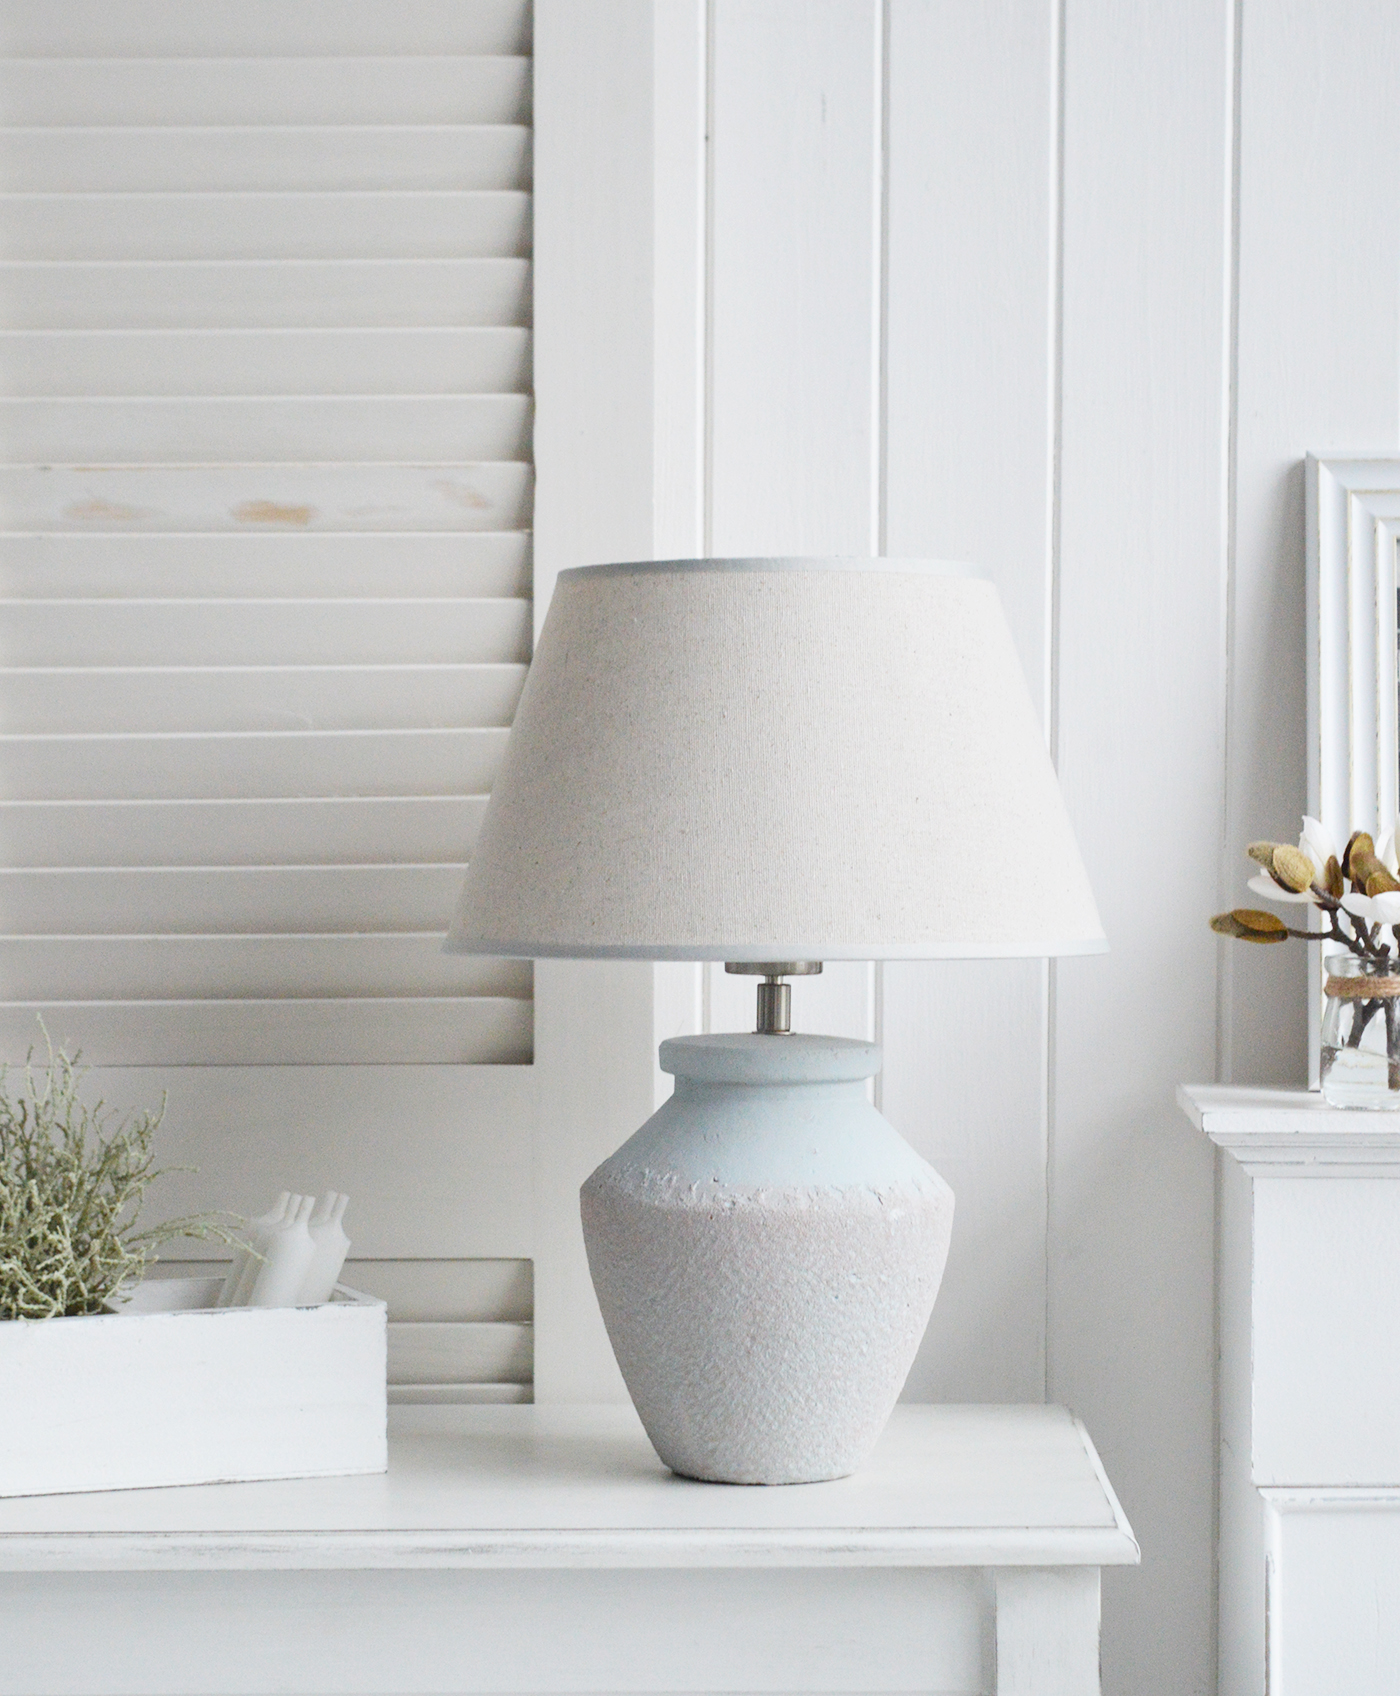 The Bar Harbor lamp - New England Style table stone lamps to complement country, coastal and city furniture and home interiors from The White Lighthouse Furniture